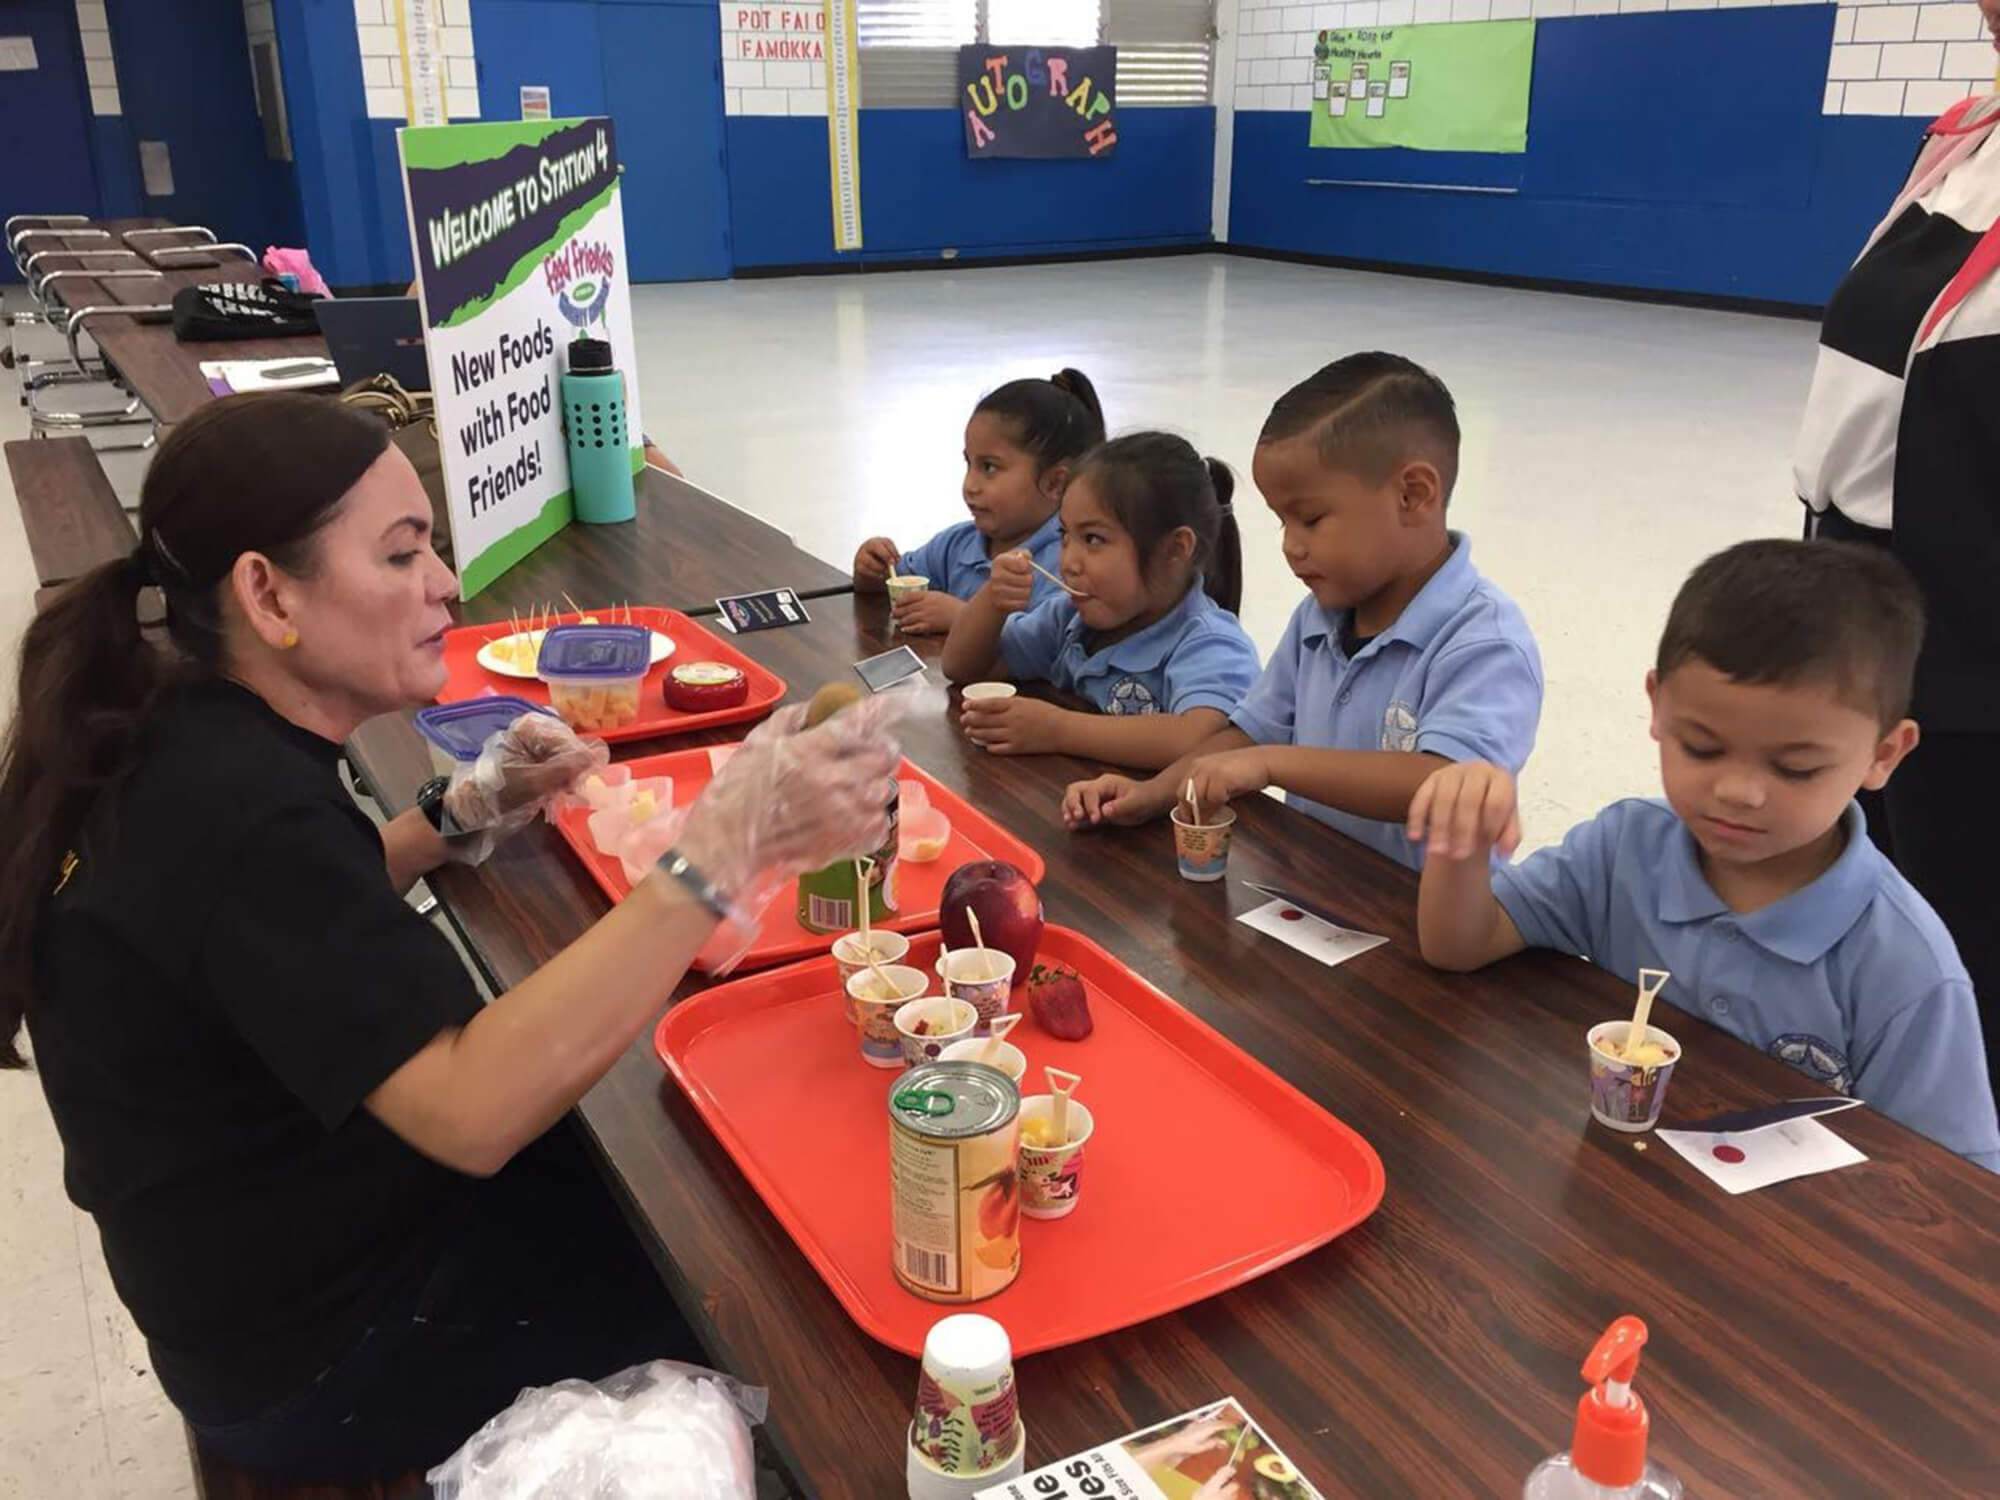 Clarissa Barcinas preparing food portions for children as part of the "Food Friends" program.